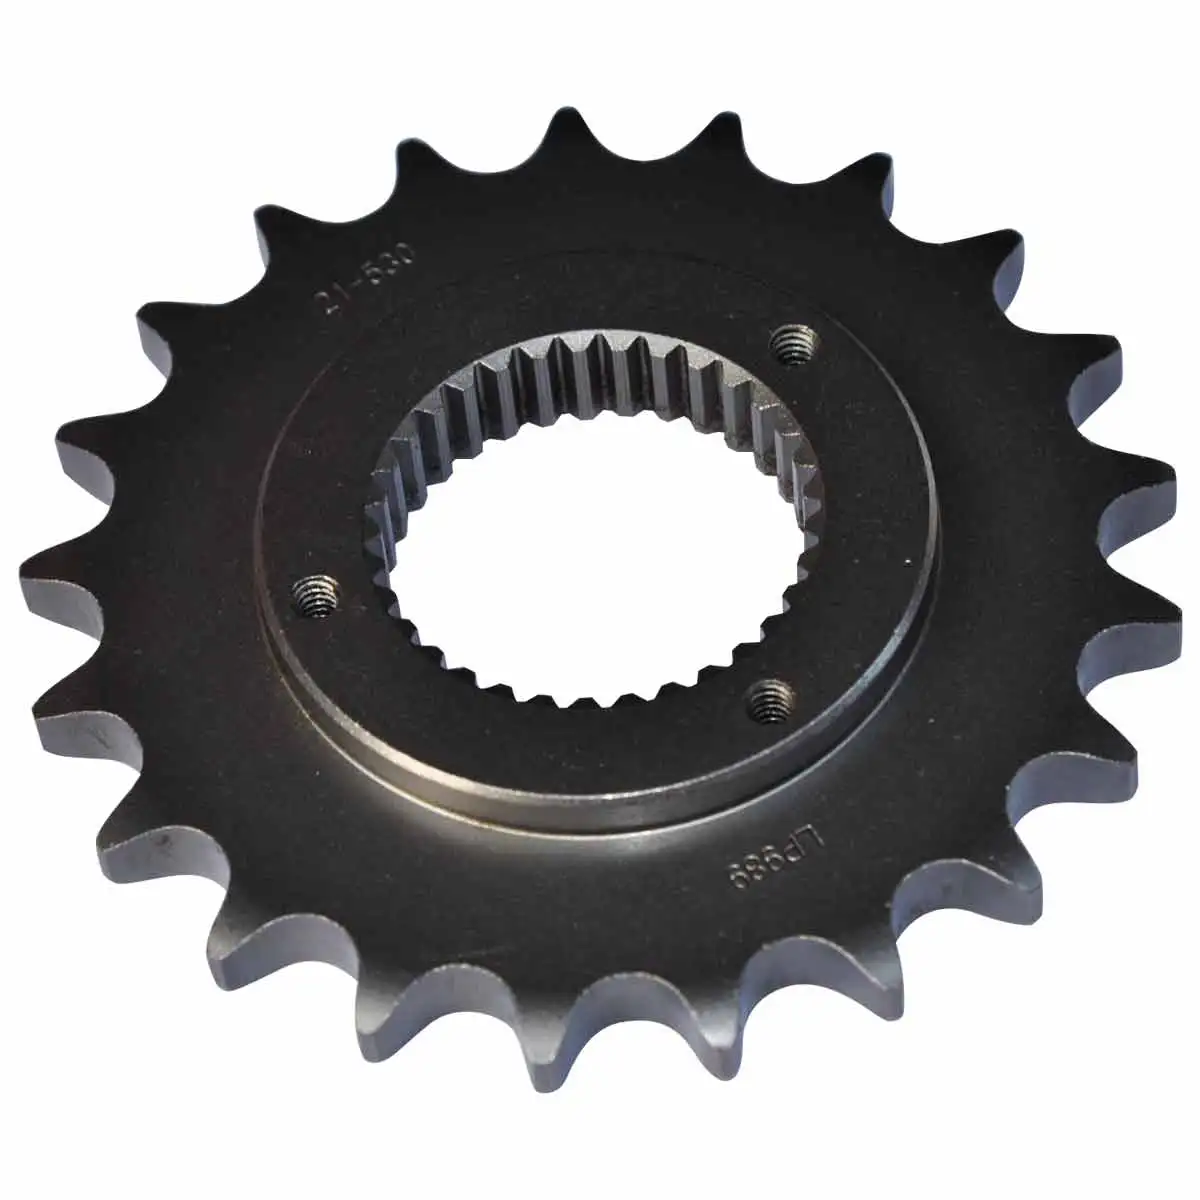 530 21T Motorcycle Front sprocket Pinion For Harley Davidson XLH883 XLH1200  Sportster XLH 883 1200 1991-1992